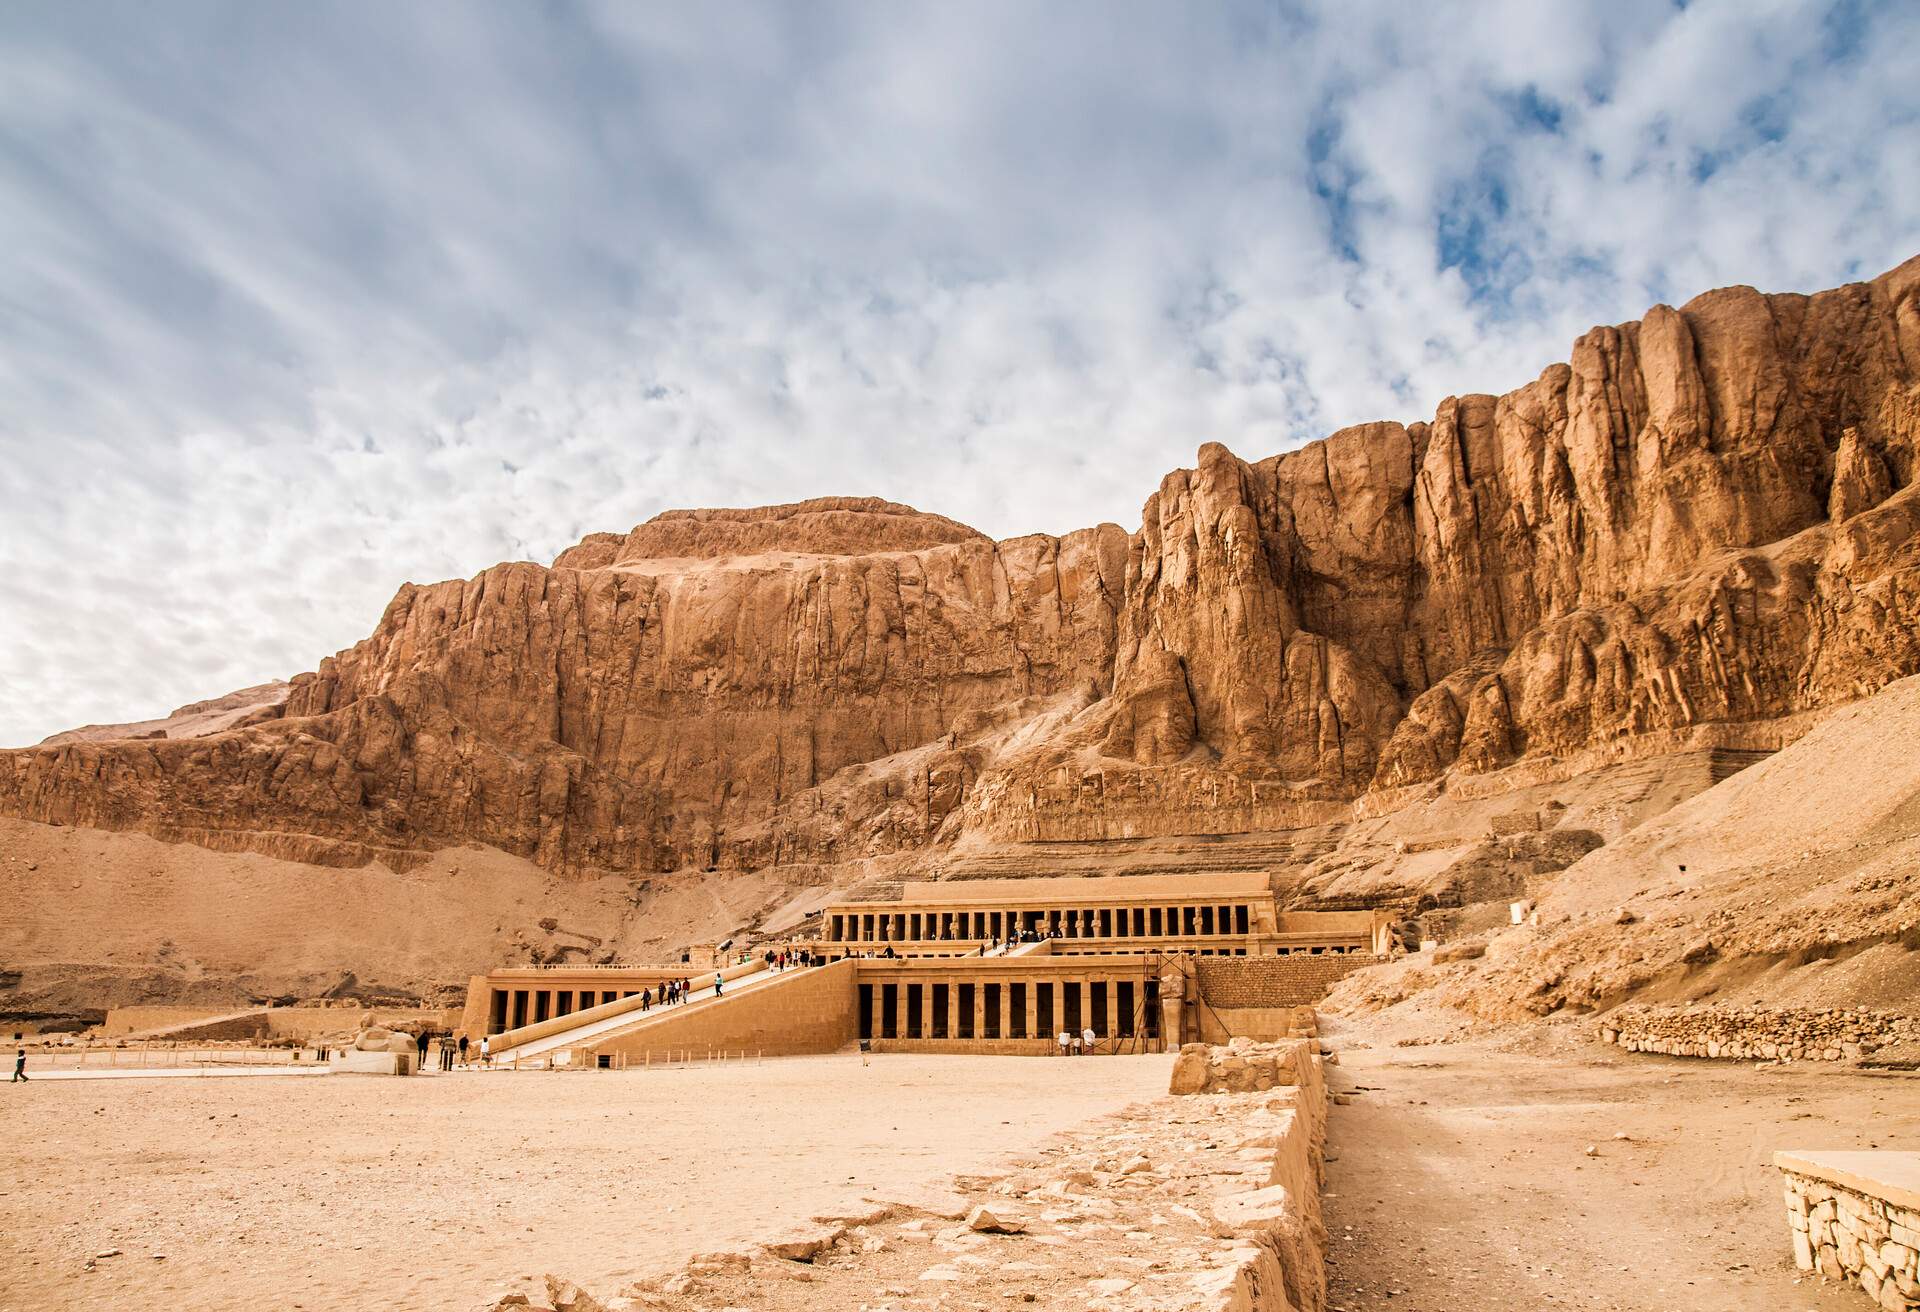 DEST_EGYPT_VALLEY-OF-THE-KINGS_Temple-Of-Hatshepsut_GettyImages-511207904